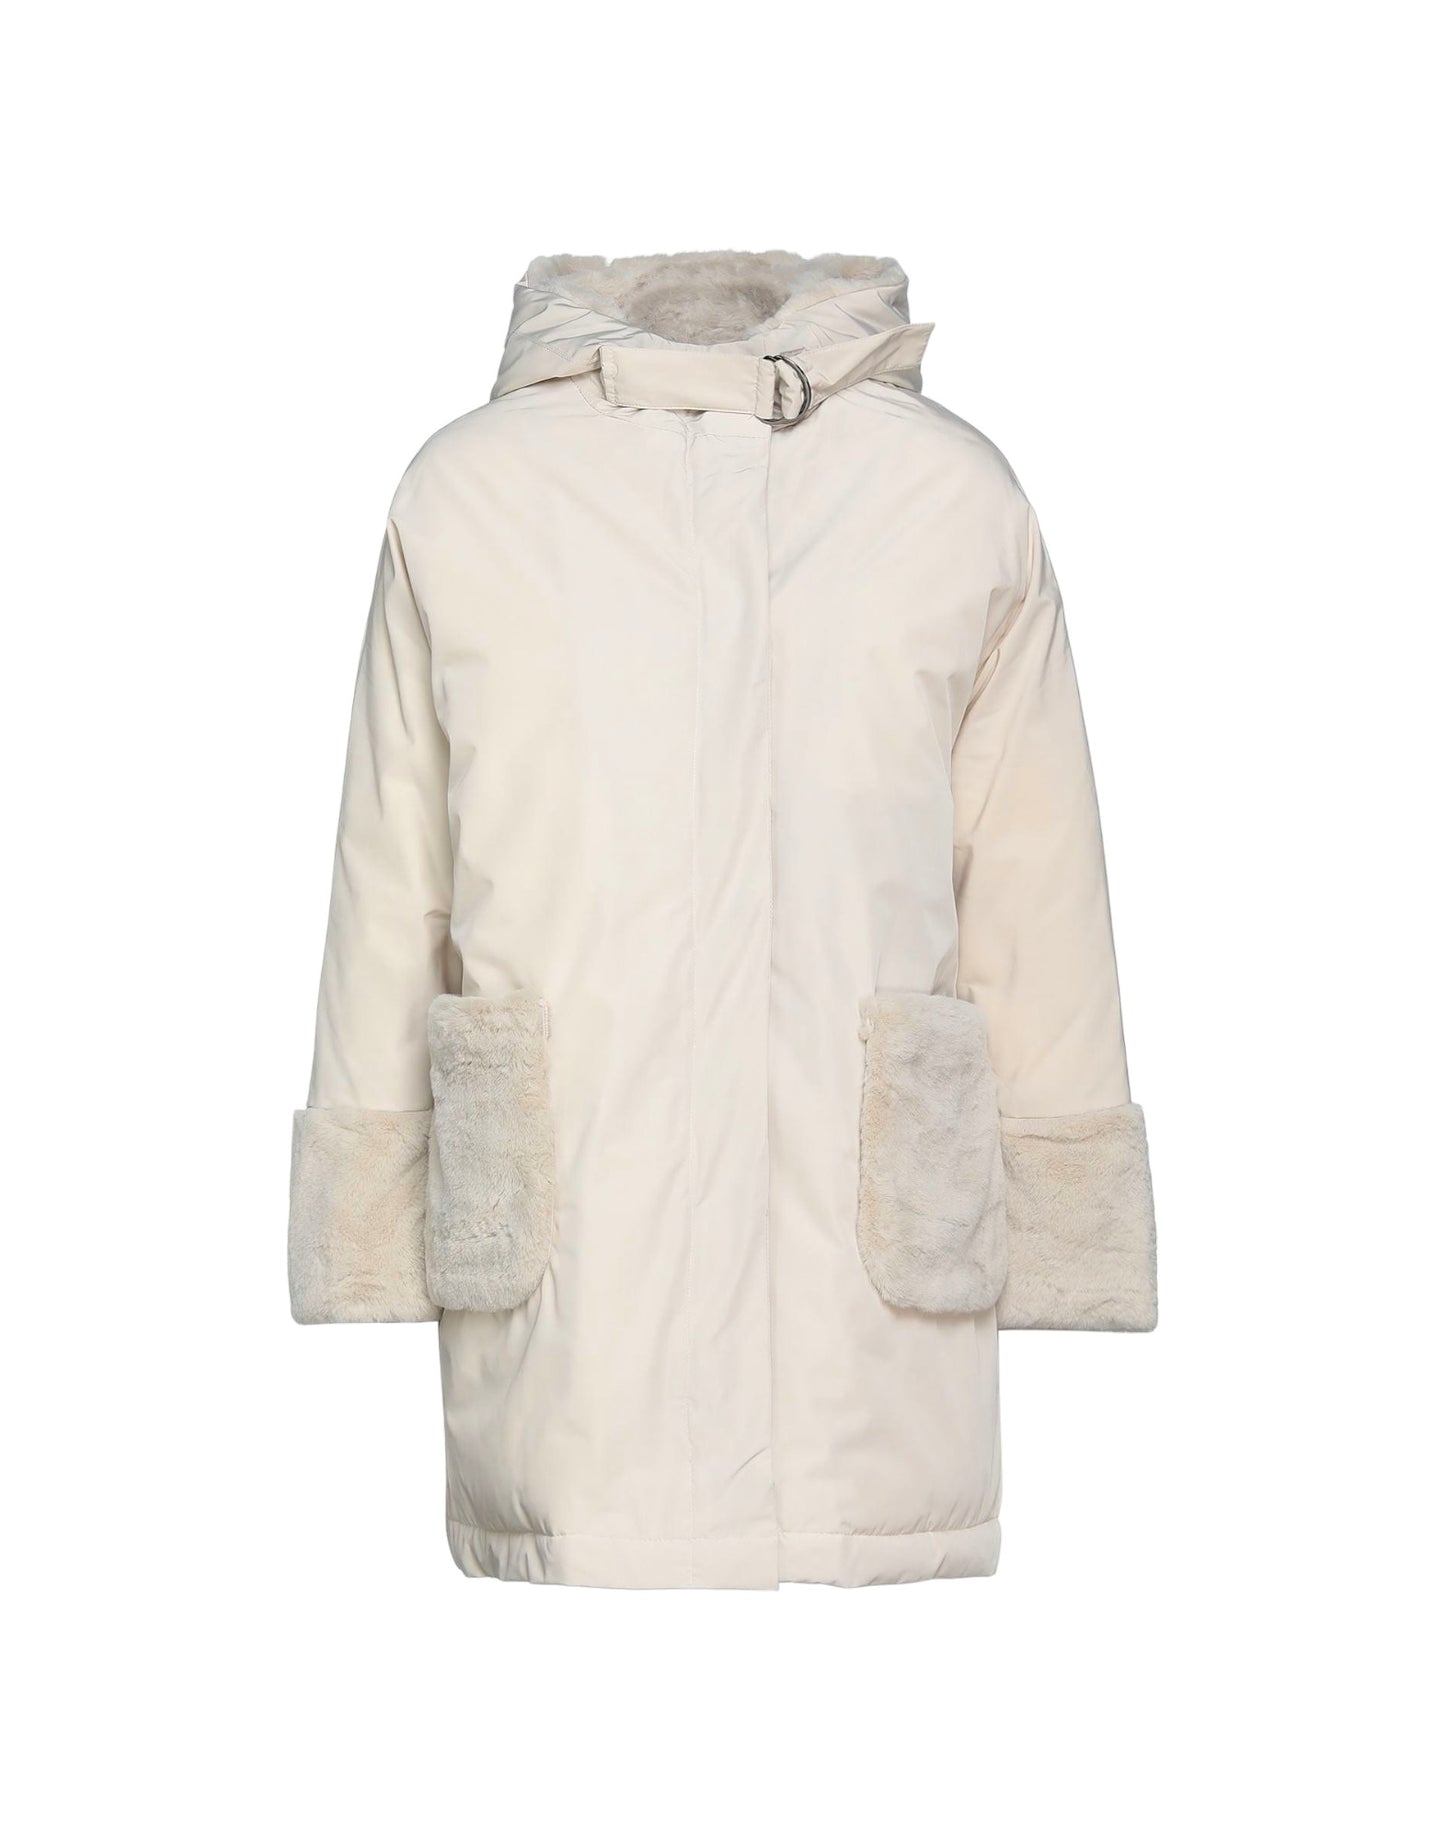 Toy G Women's Jacket with Fur Pocket